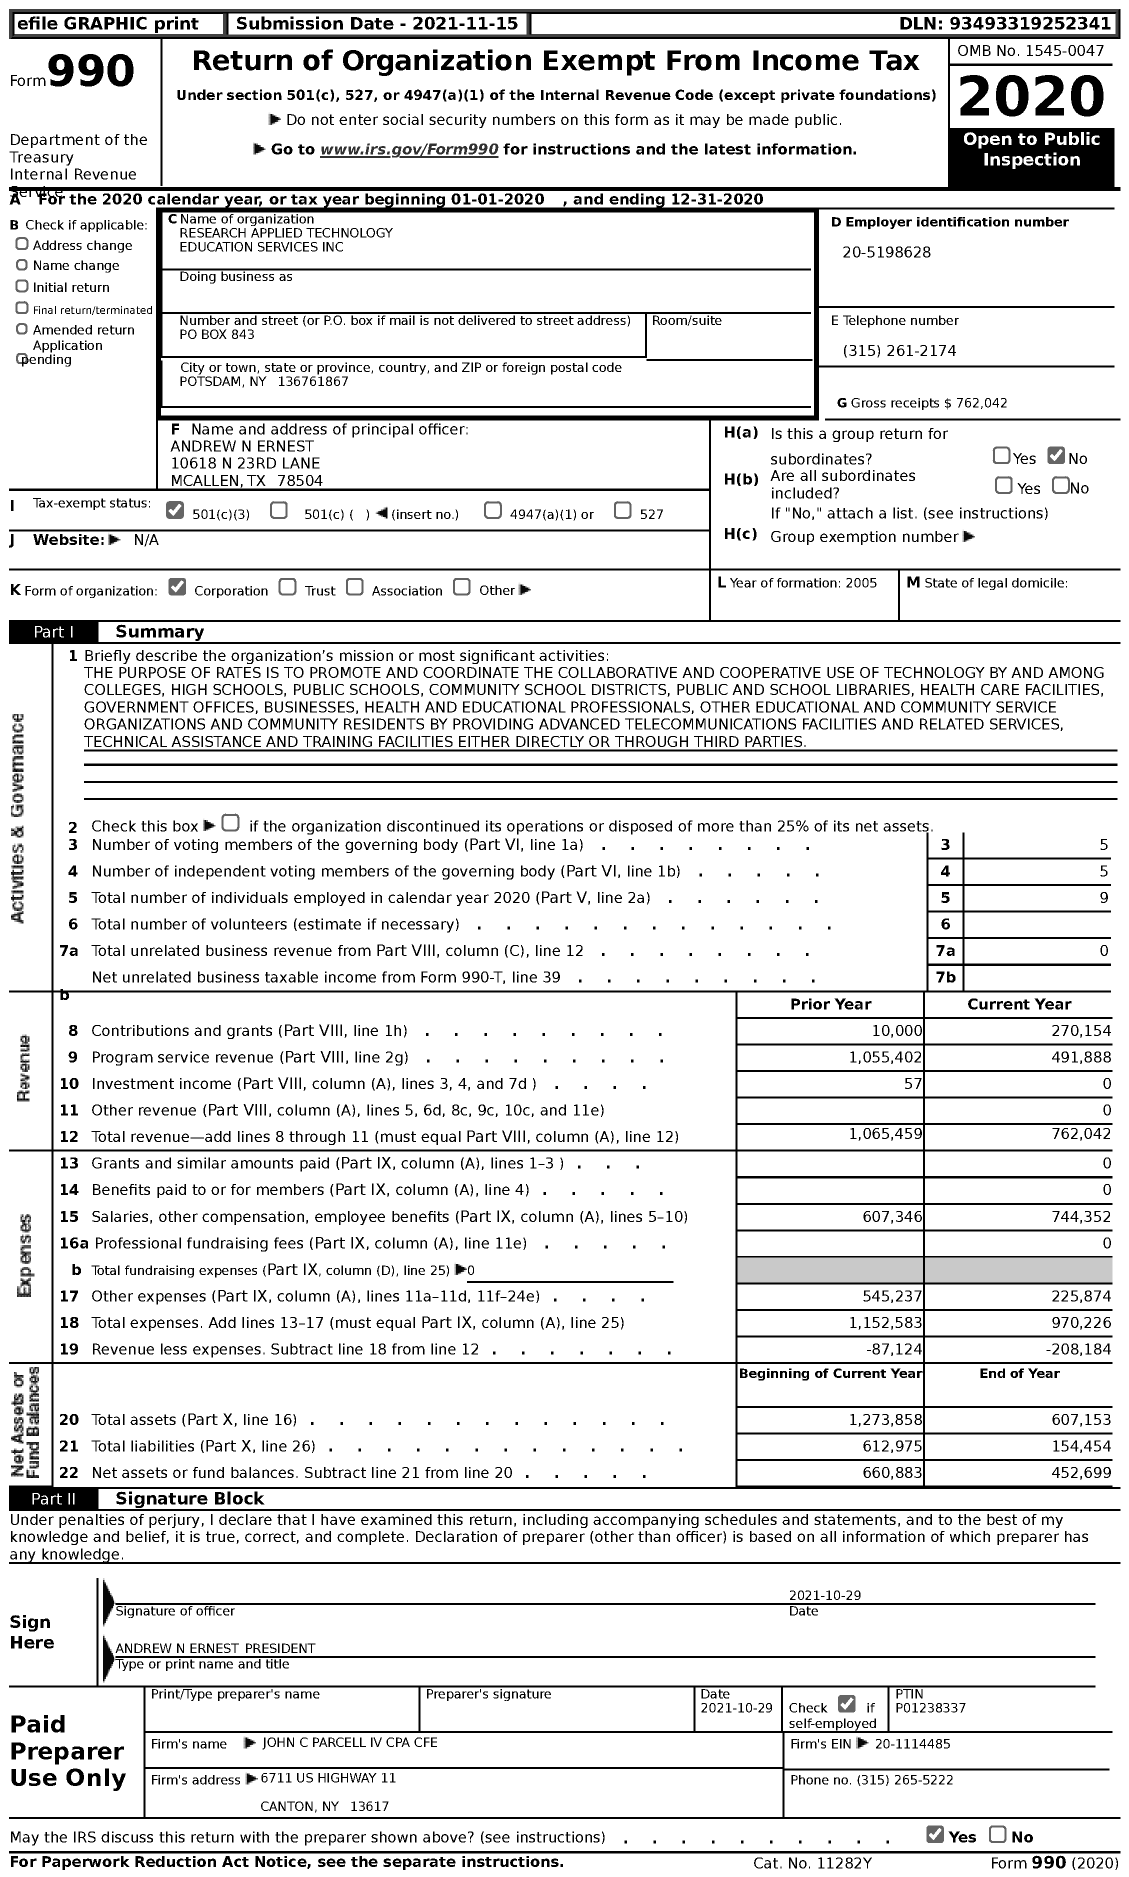 Image of first page of 2020 Form 990 for Research Applied Technology Education Services